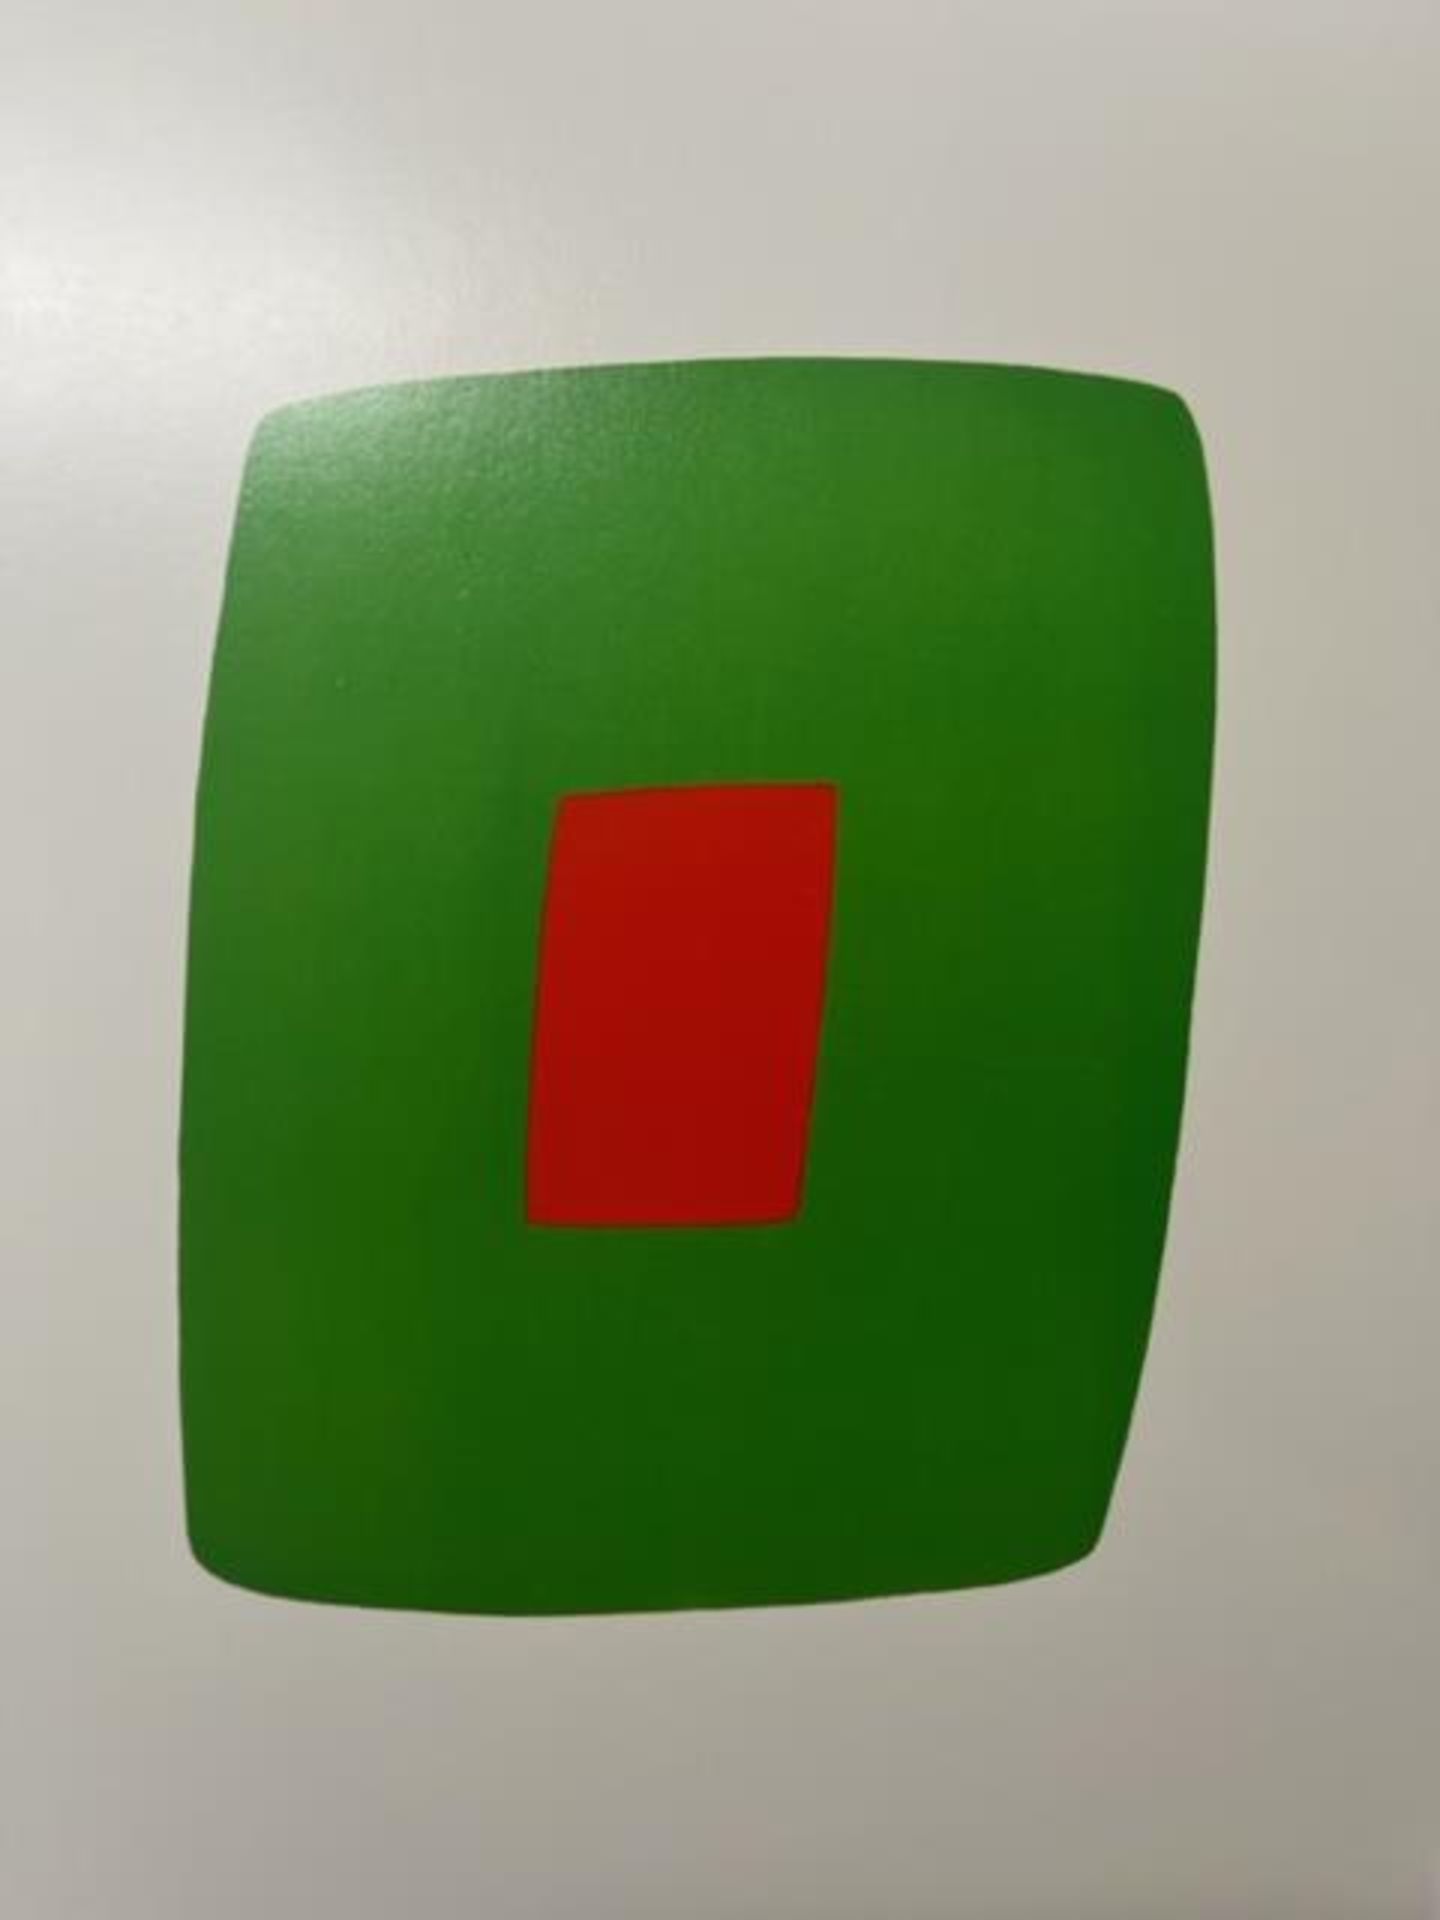 Ellsworth Kelly "Green with Red" Print.